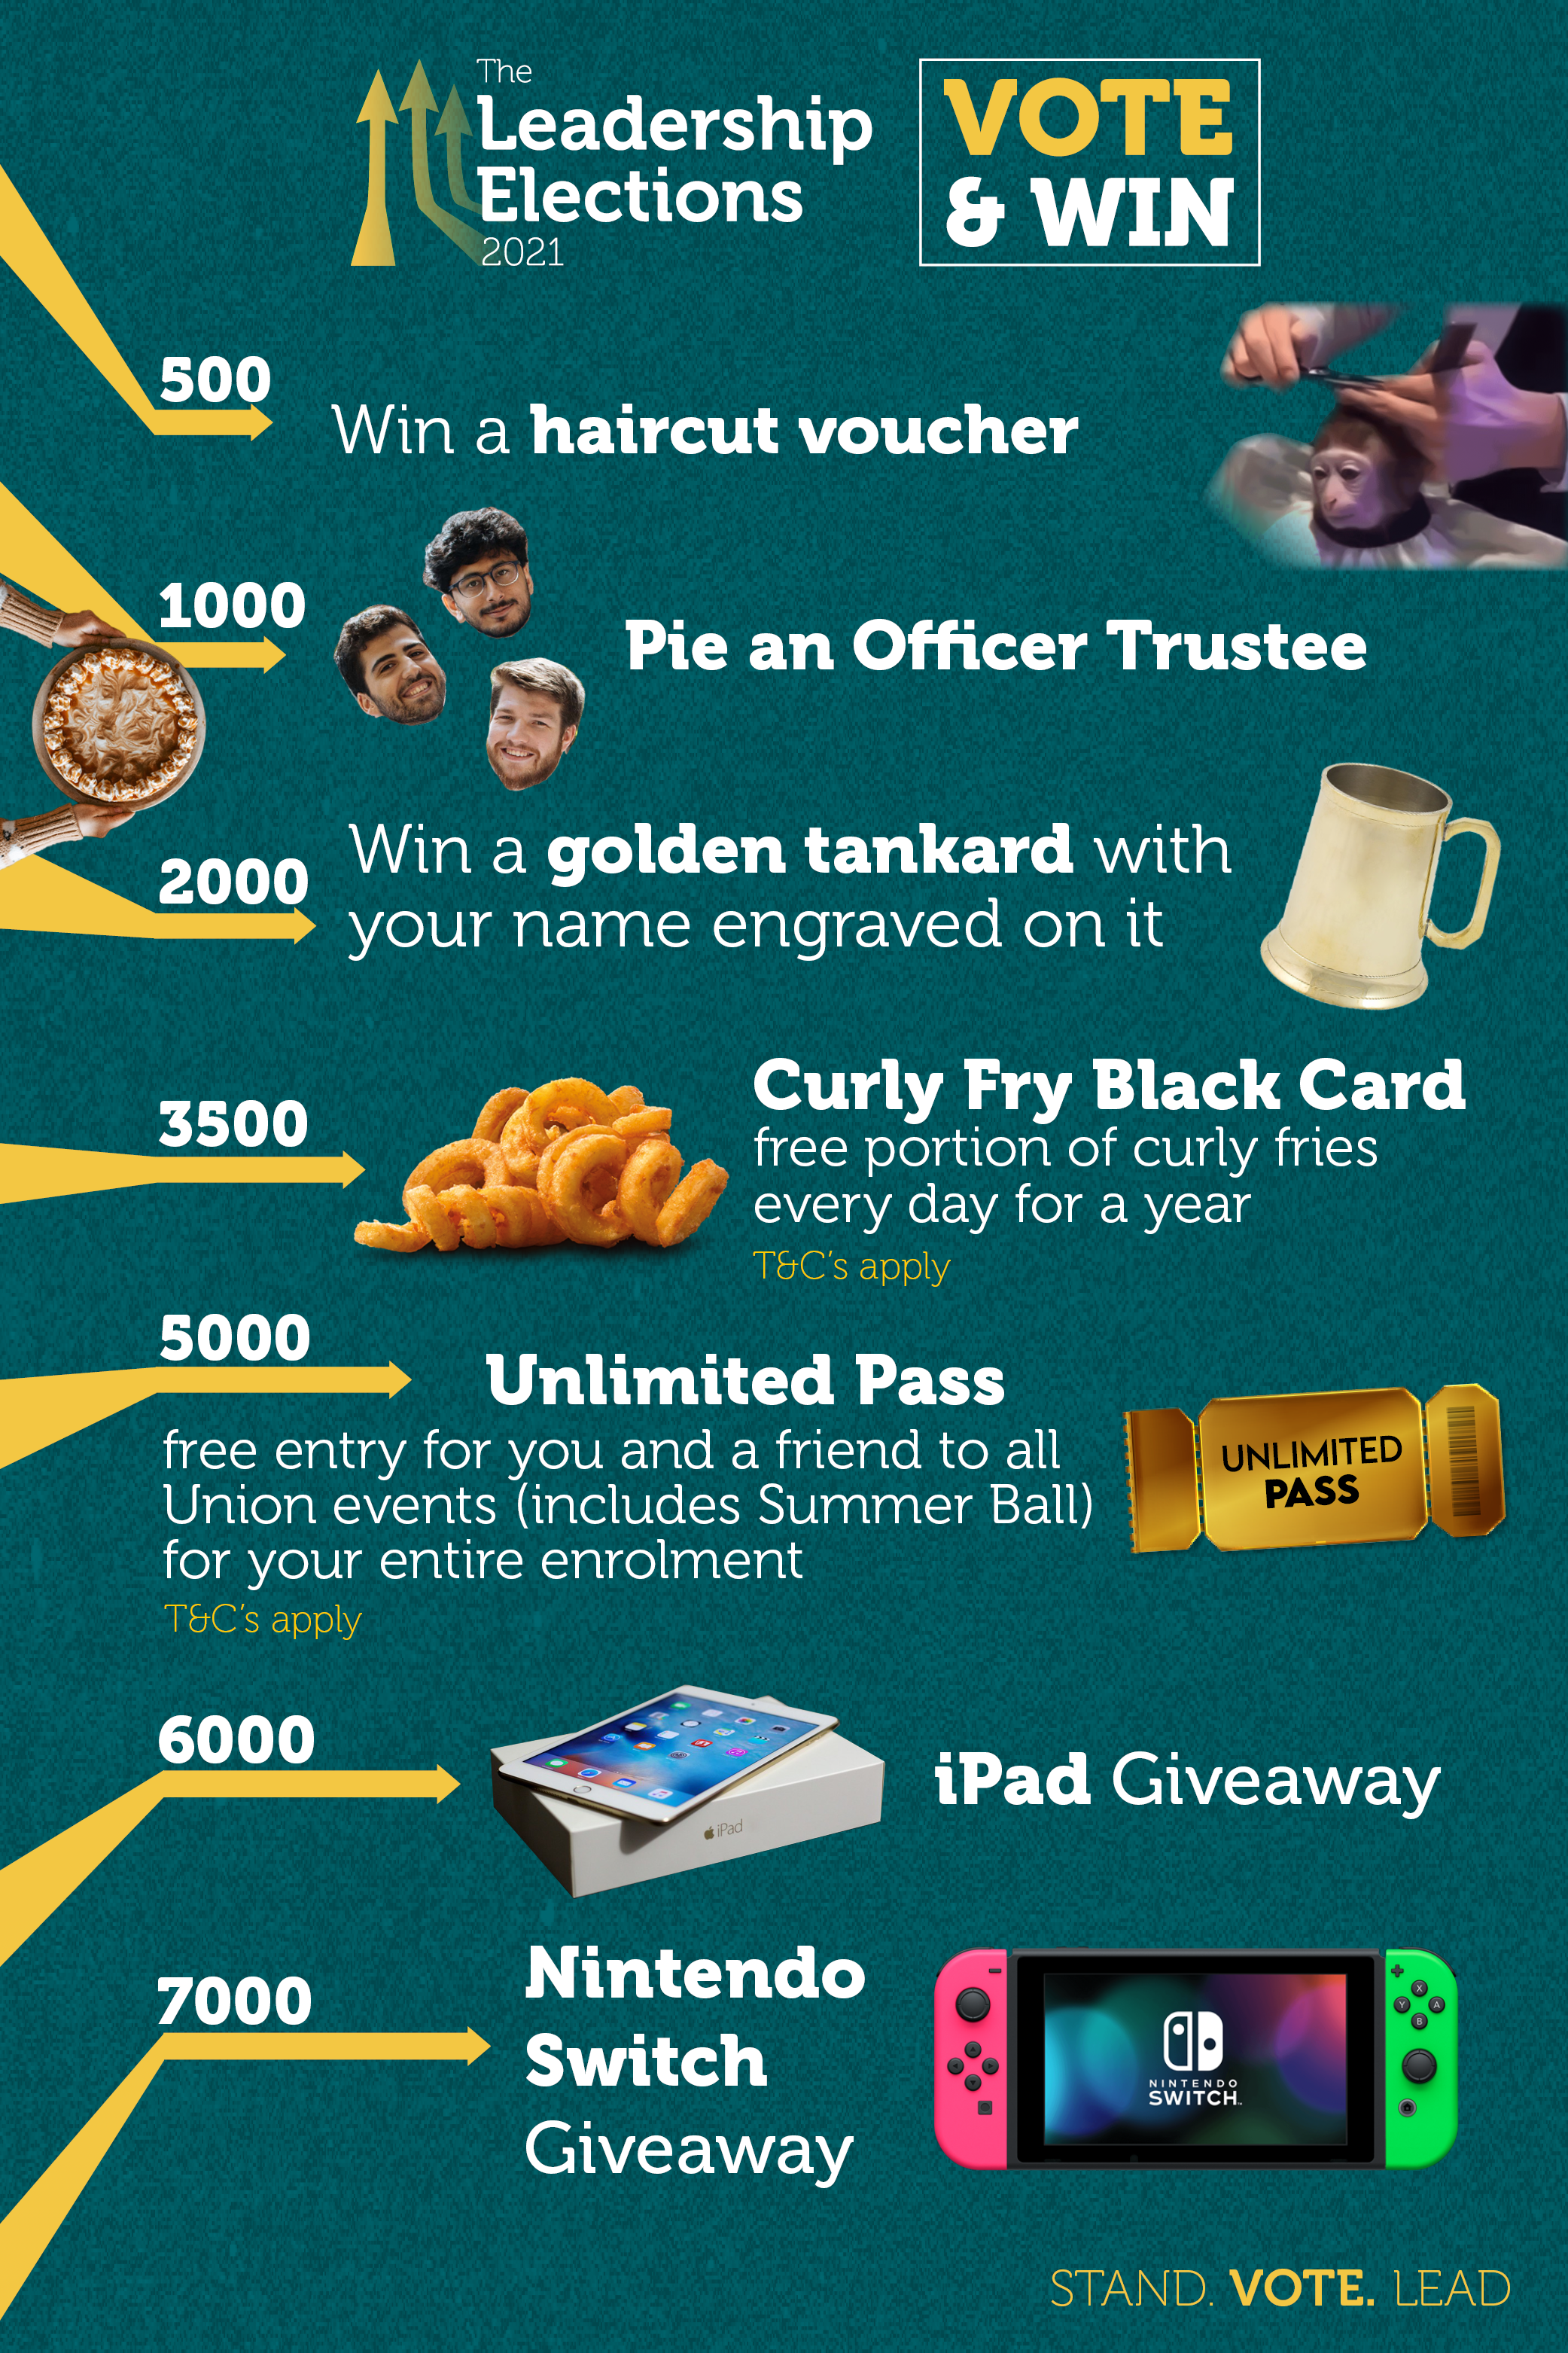 Voting incentives